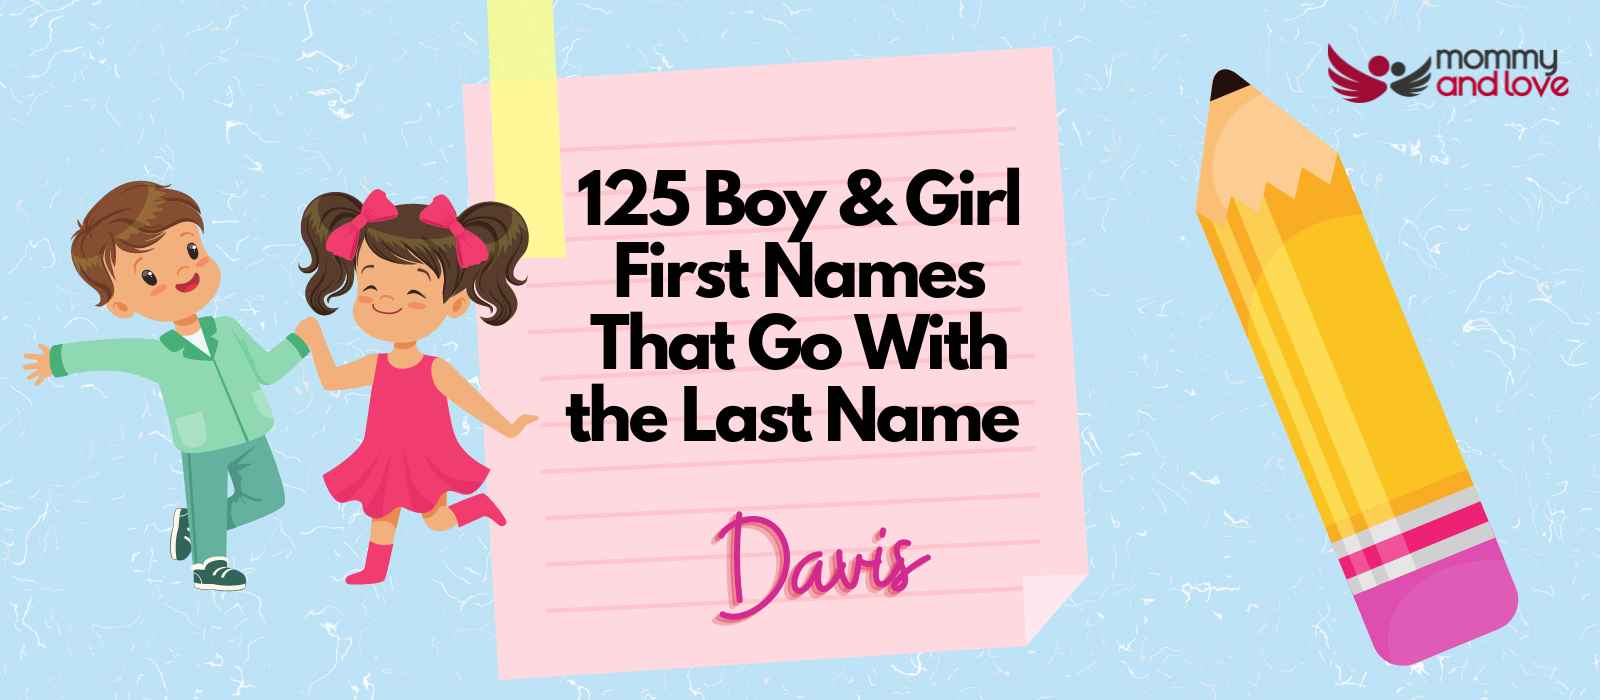 125 Boy & Girl First Names That Go With the Last Name Davis